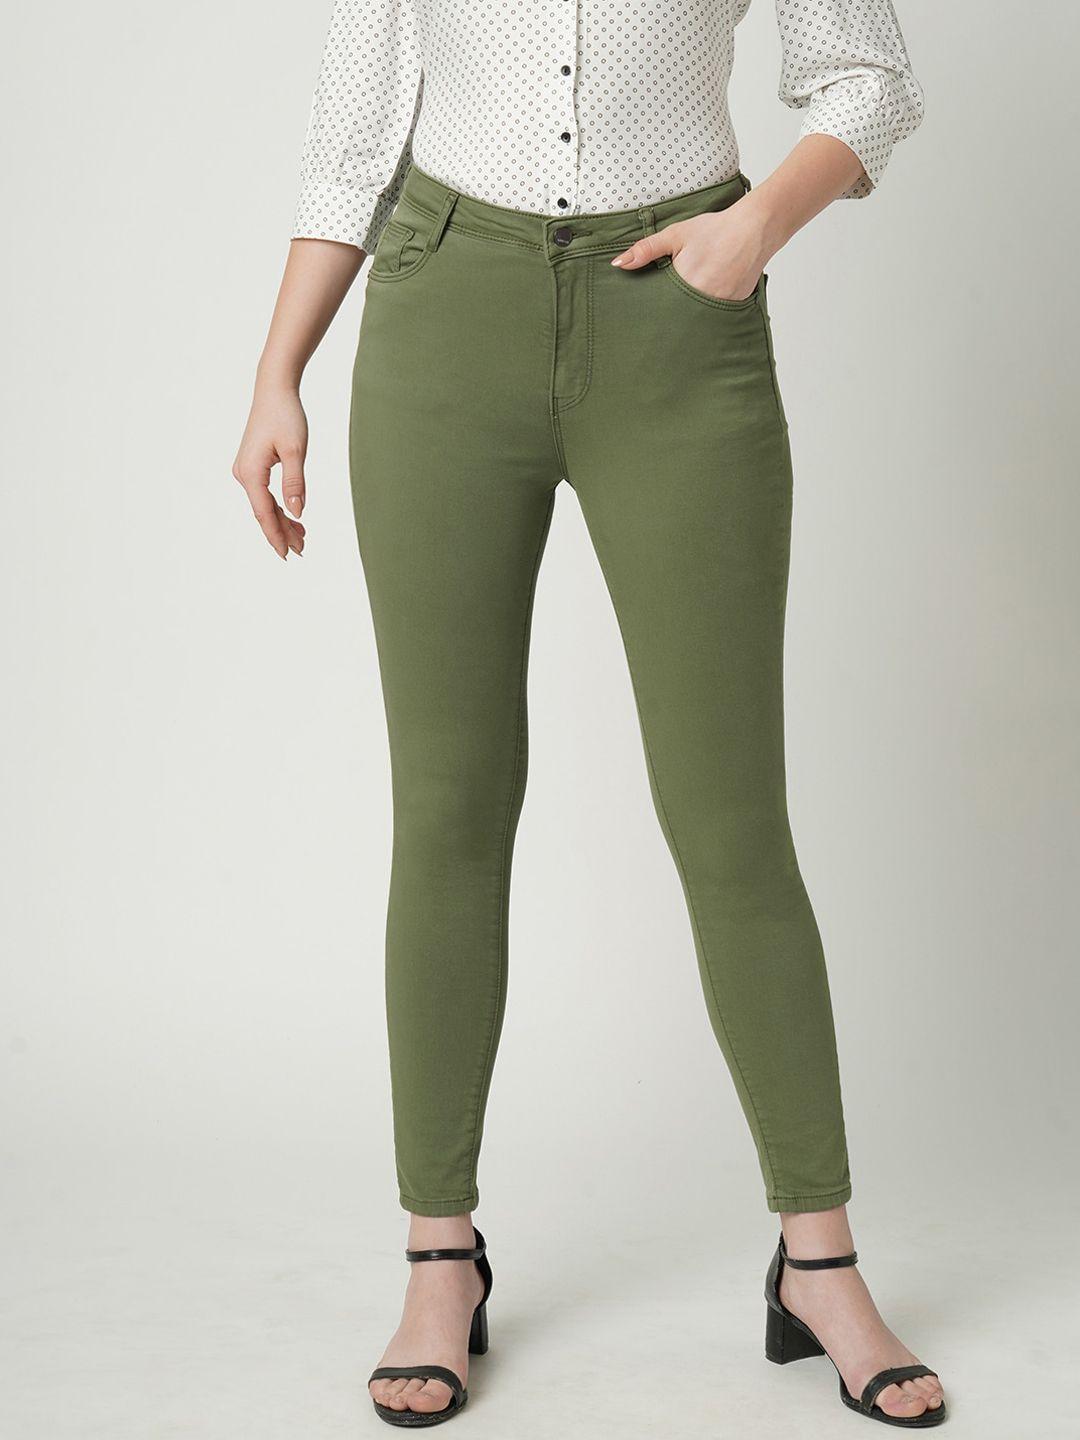 kraus jeans women olive green super skinny fit high-rise jeans